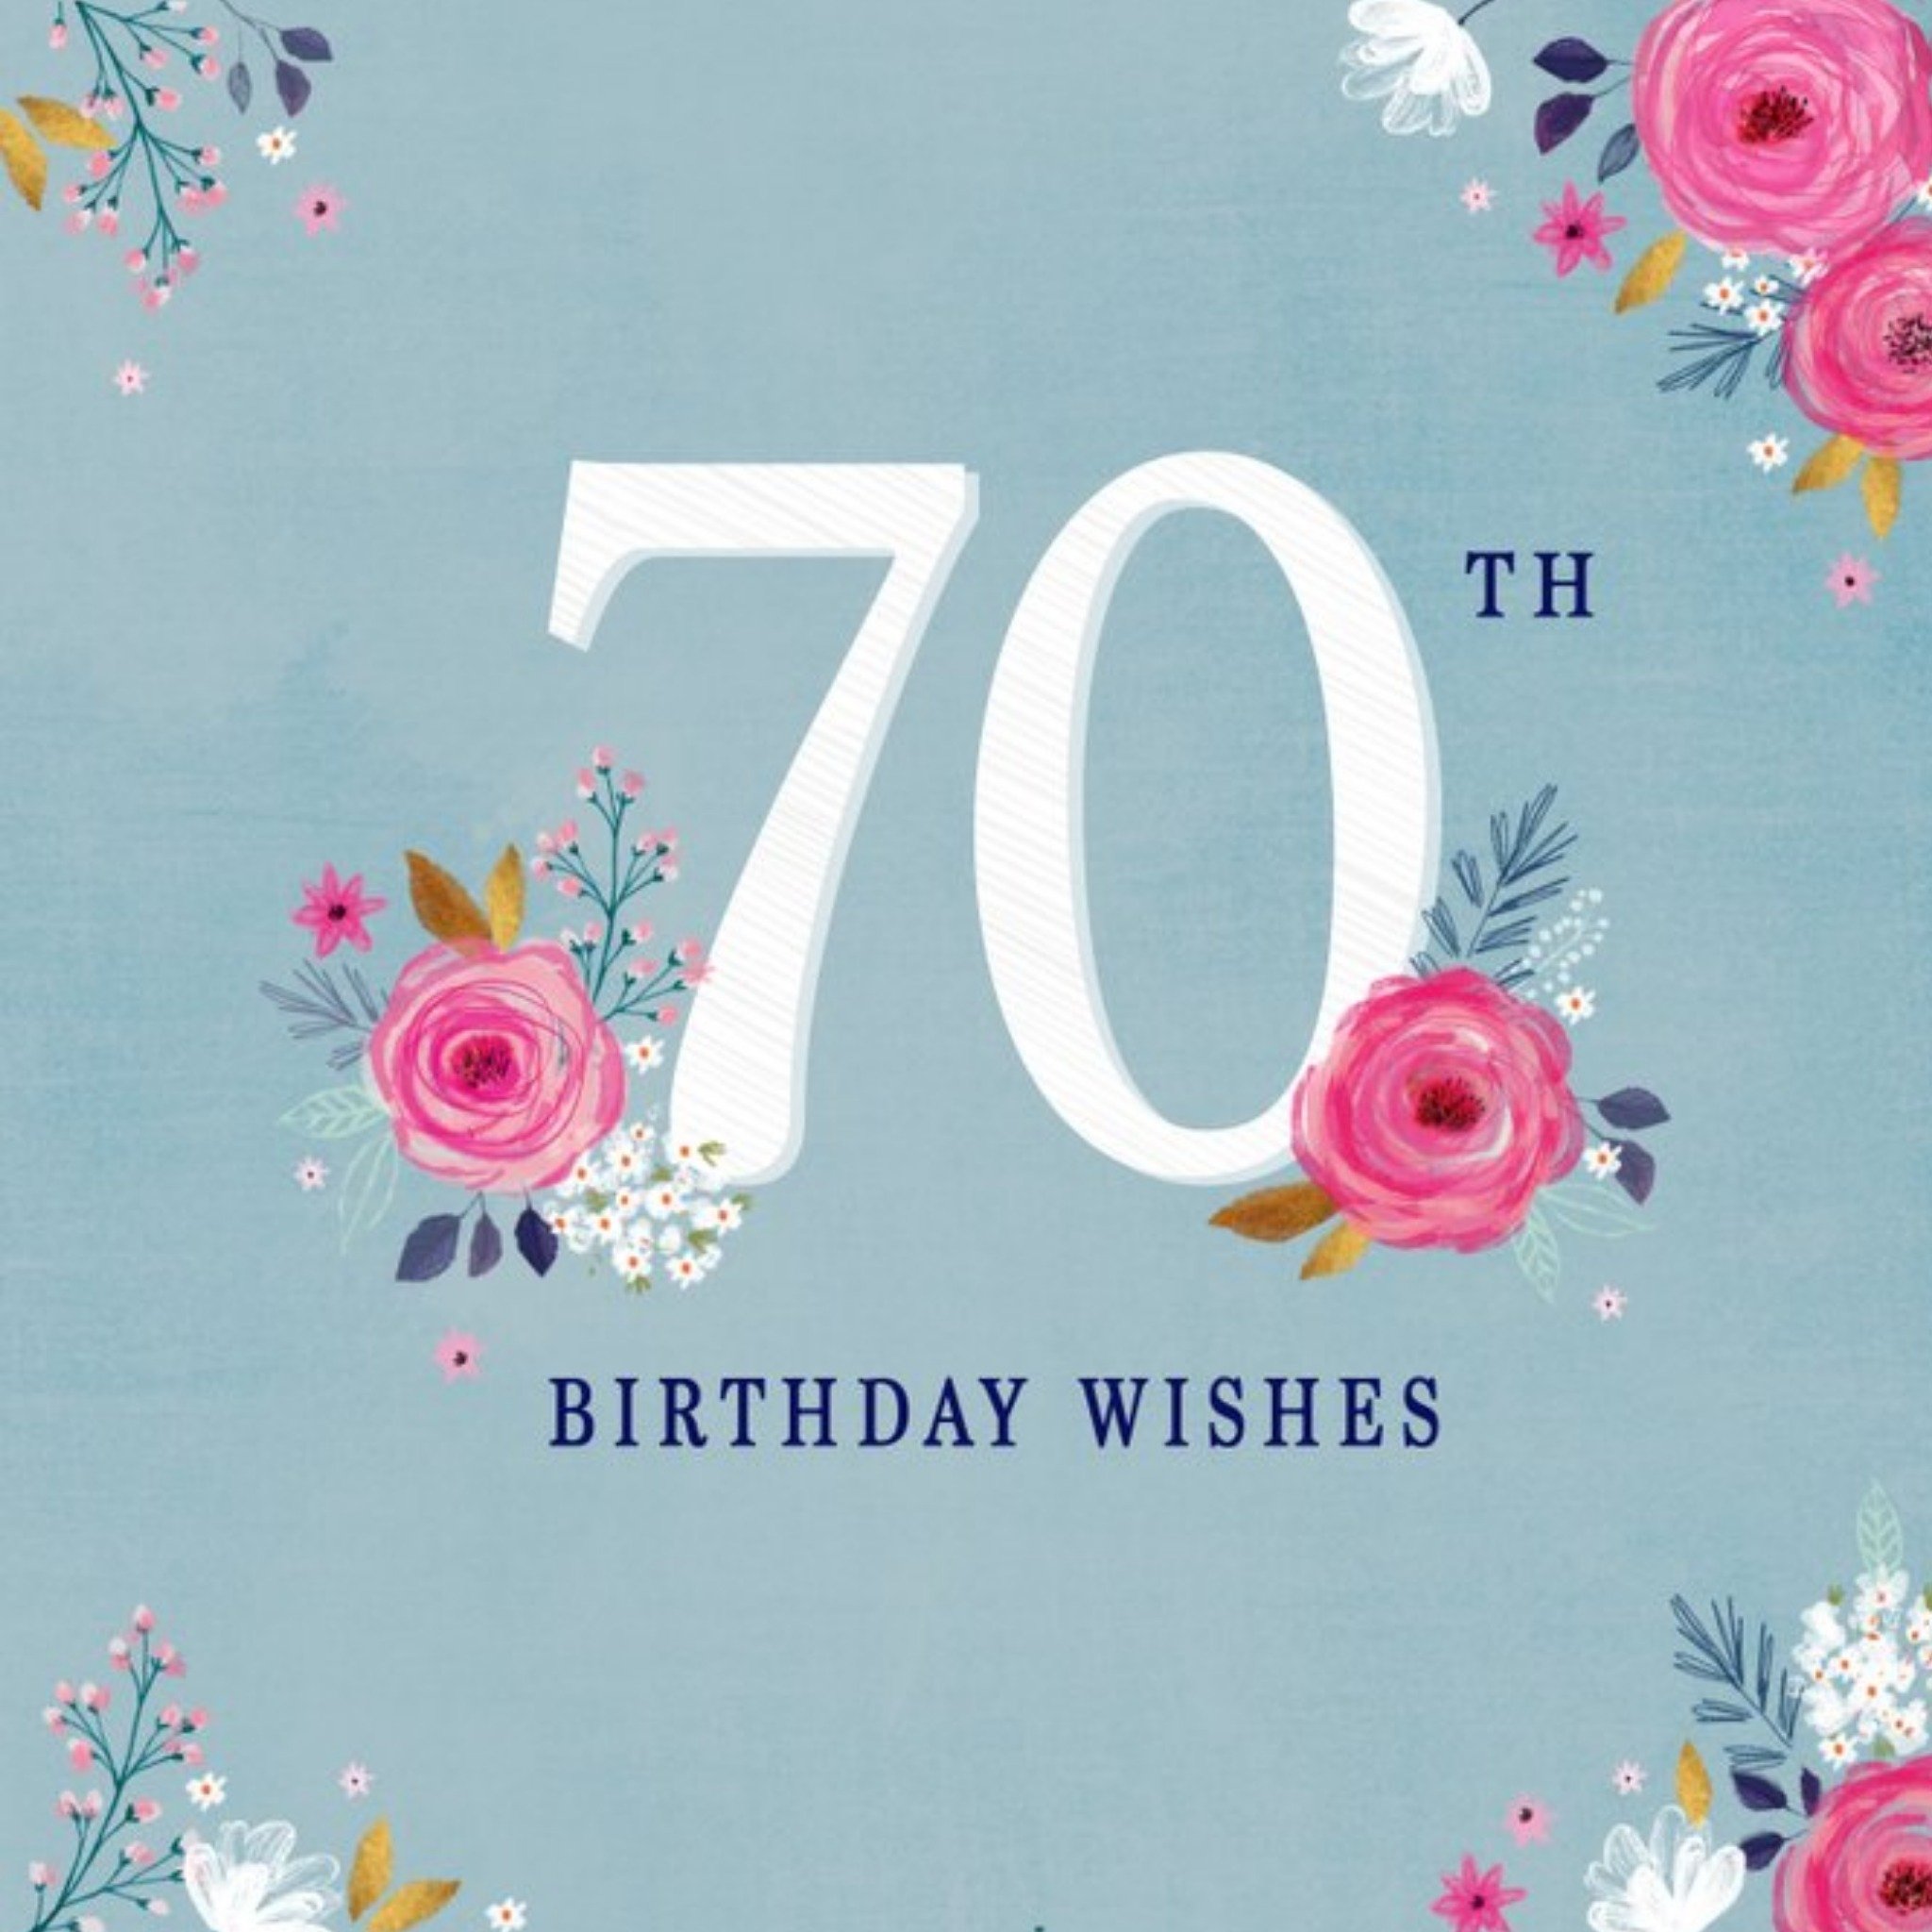 Moonpig Typographic Design Floral 70th Birthday Wishes Card, Large